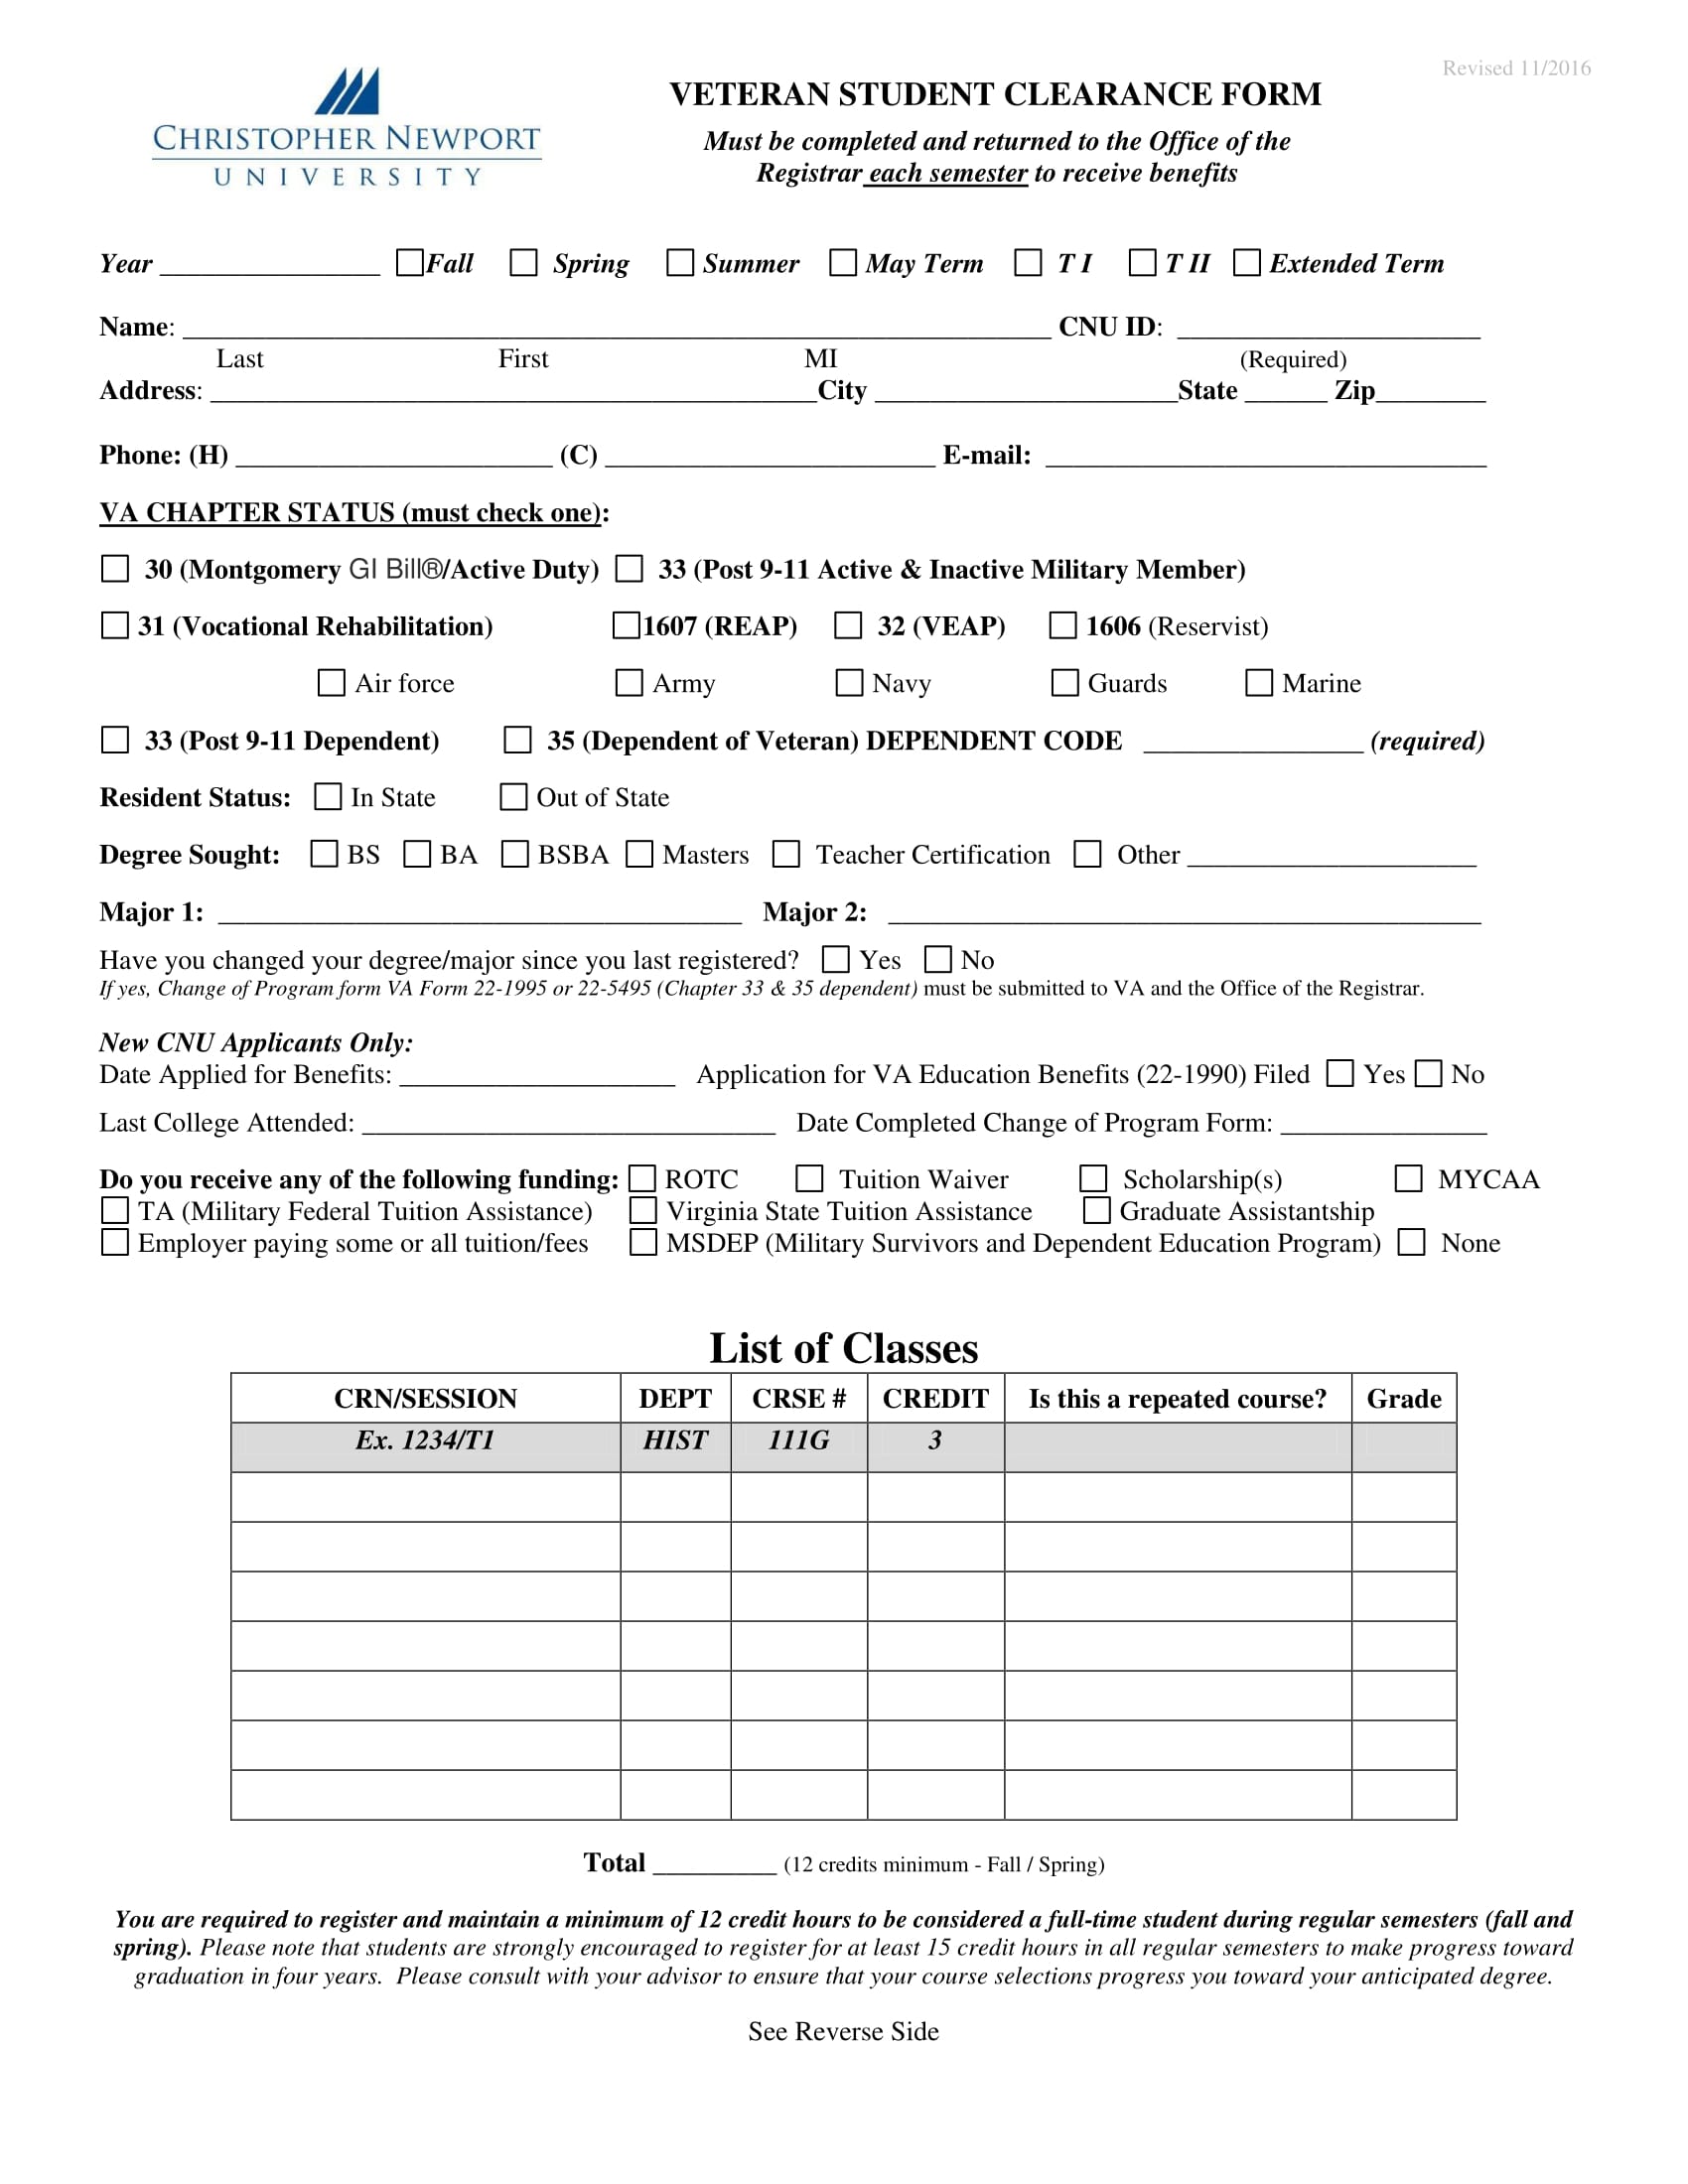 veteran student clearance form 1